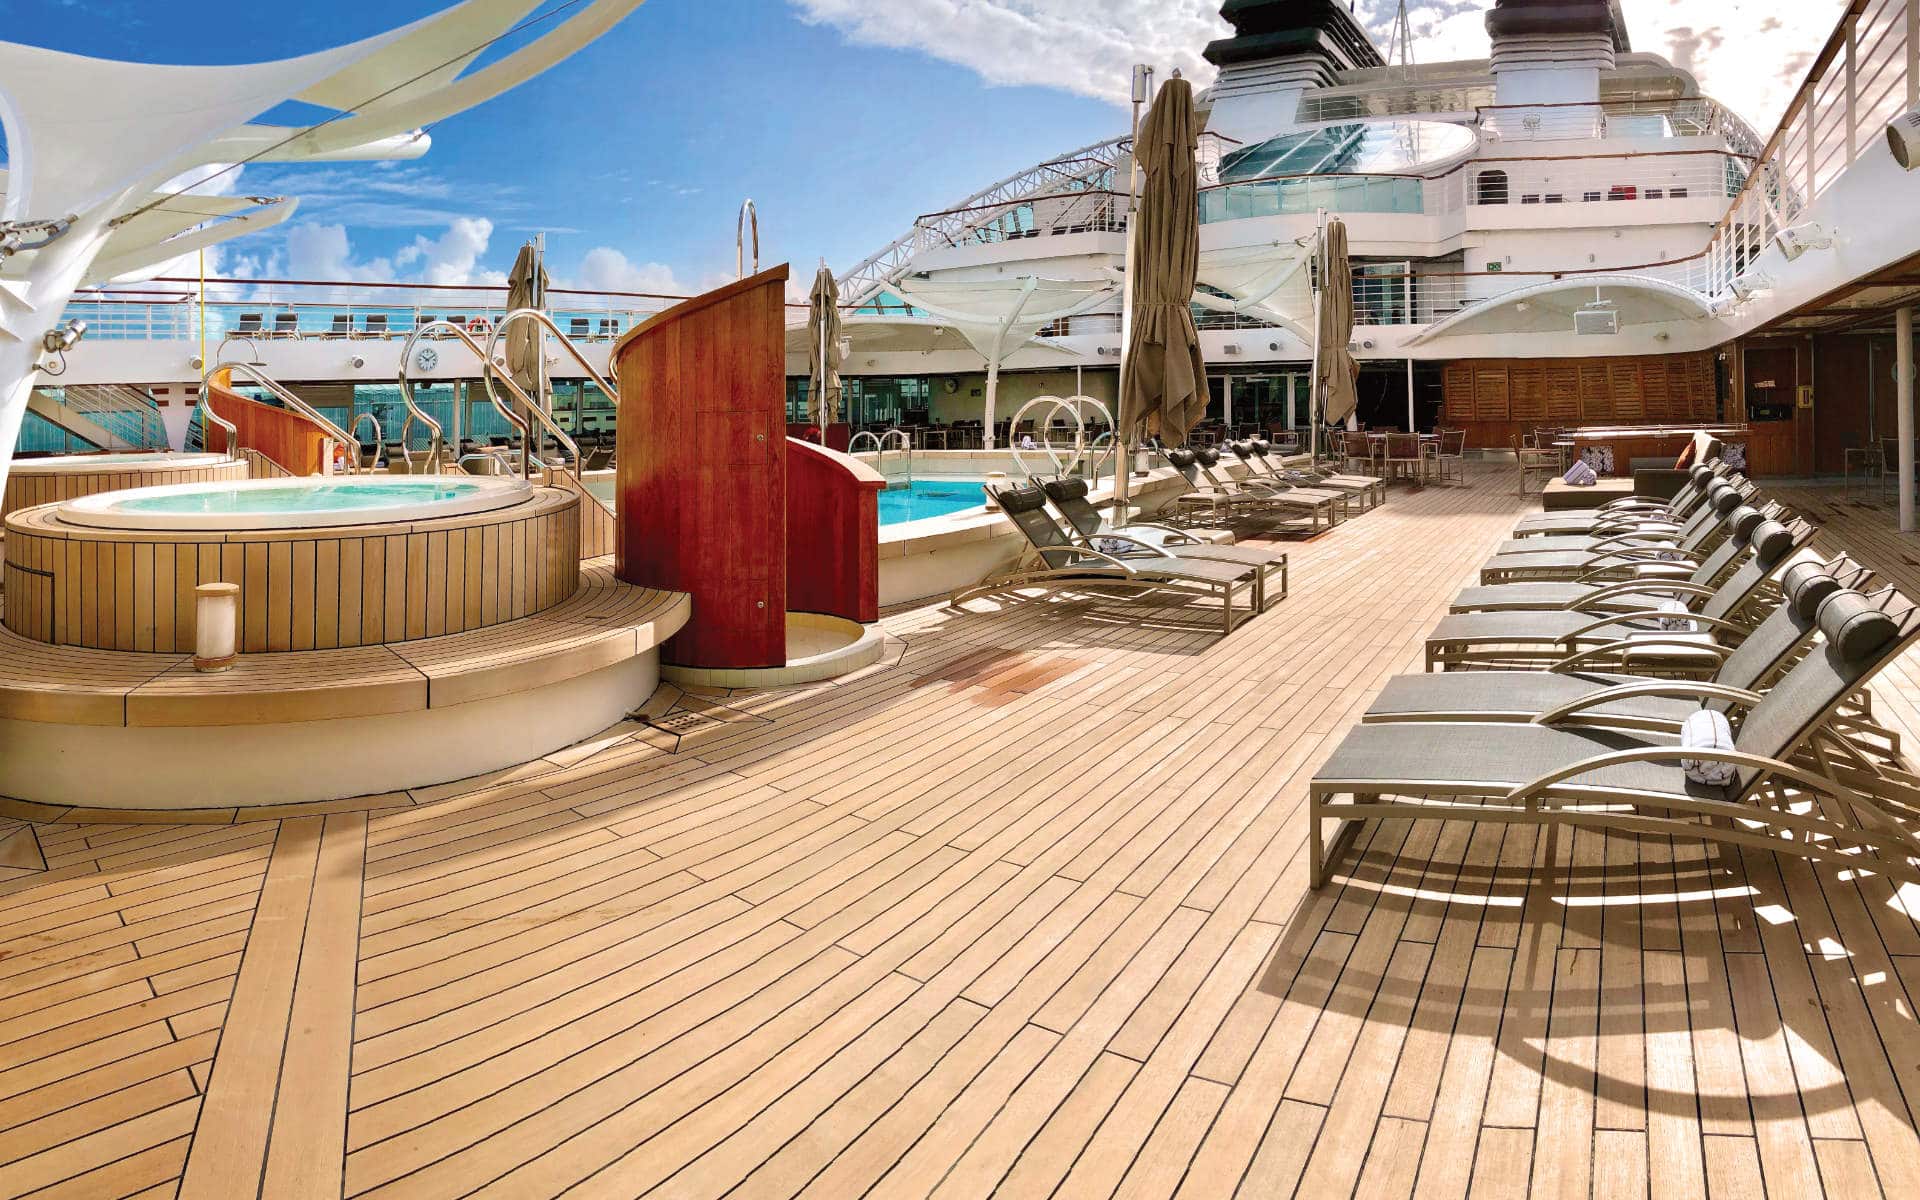 The pool deck on Seabourn Ovation.